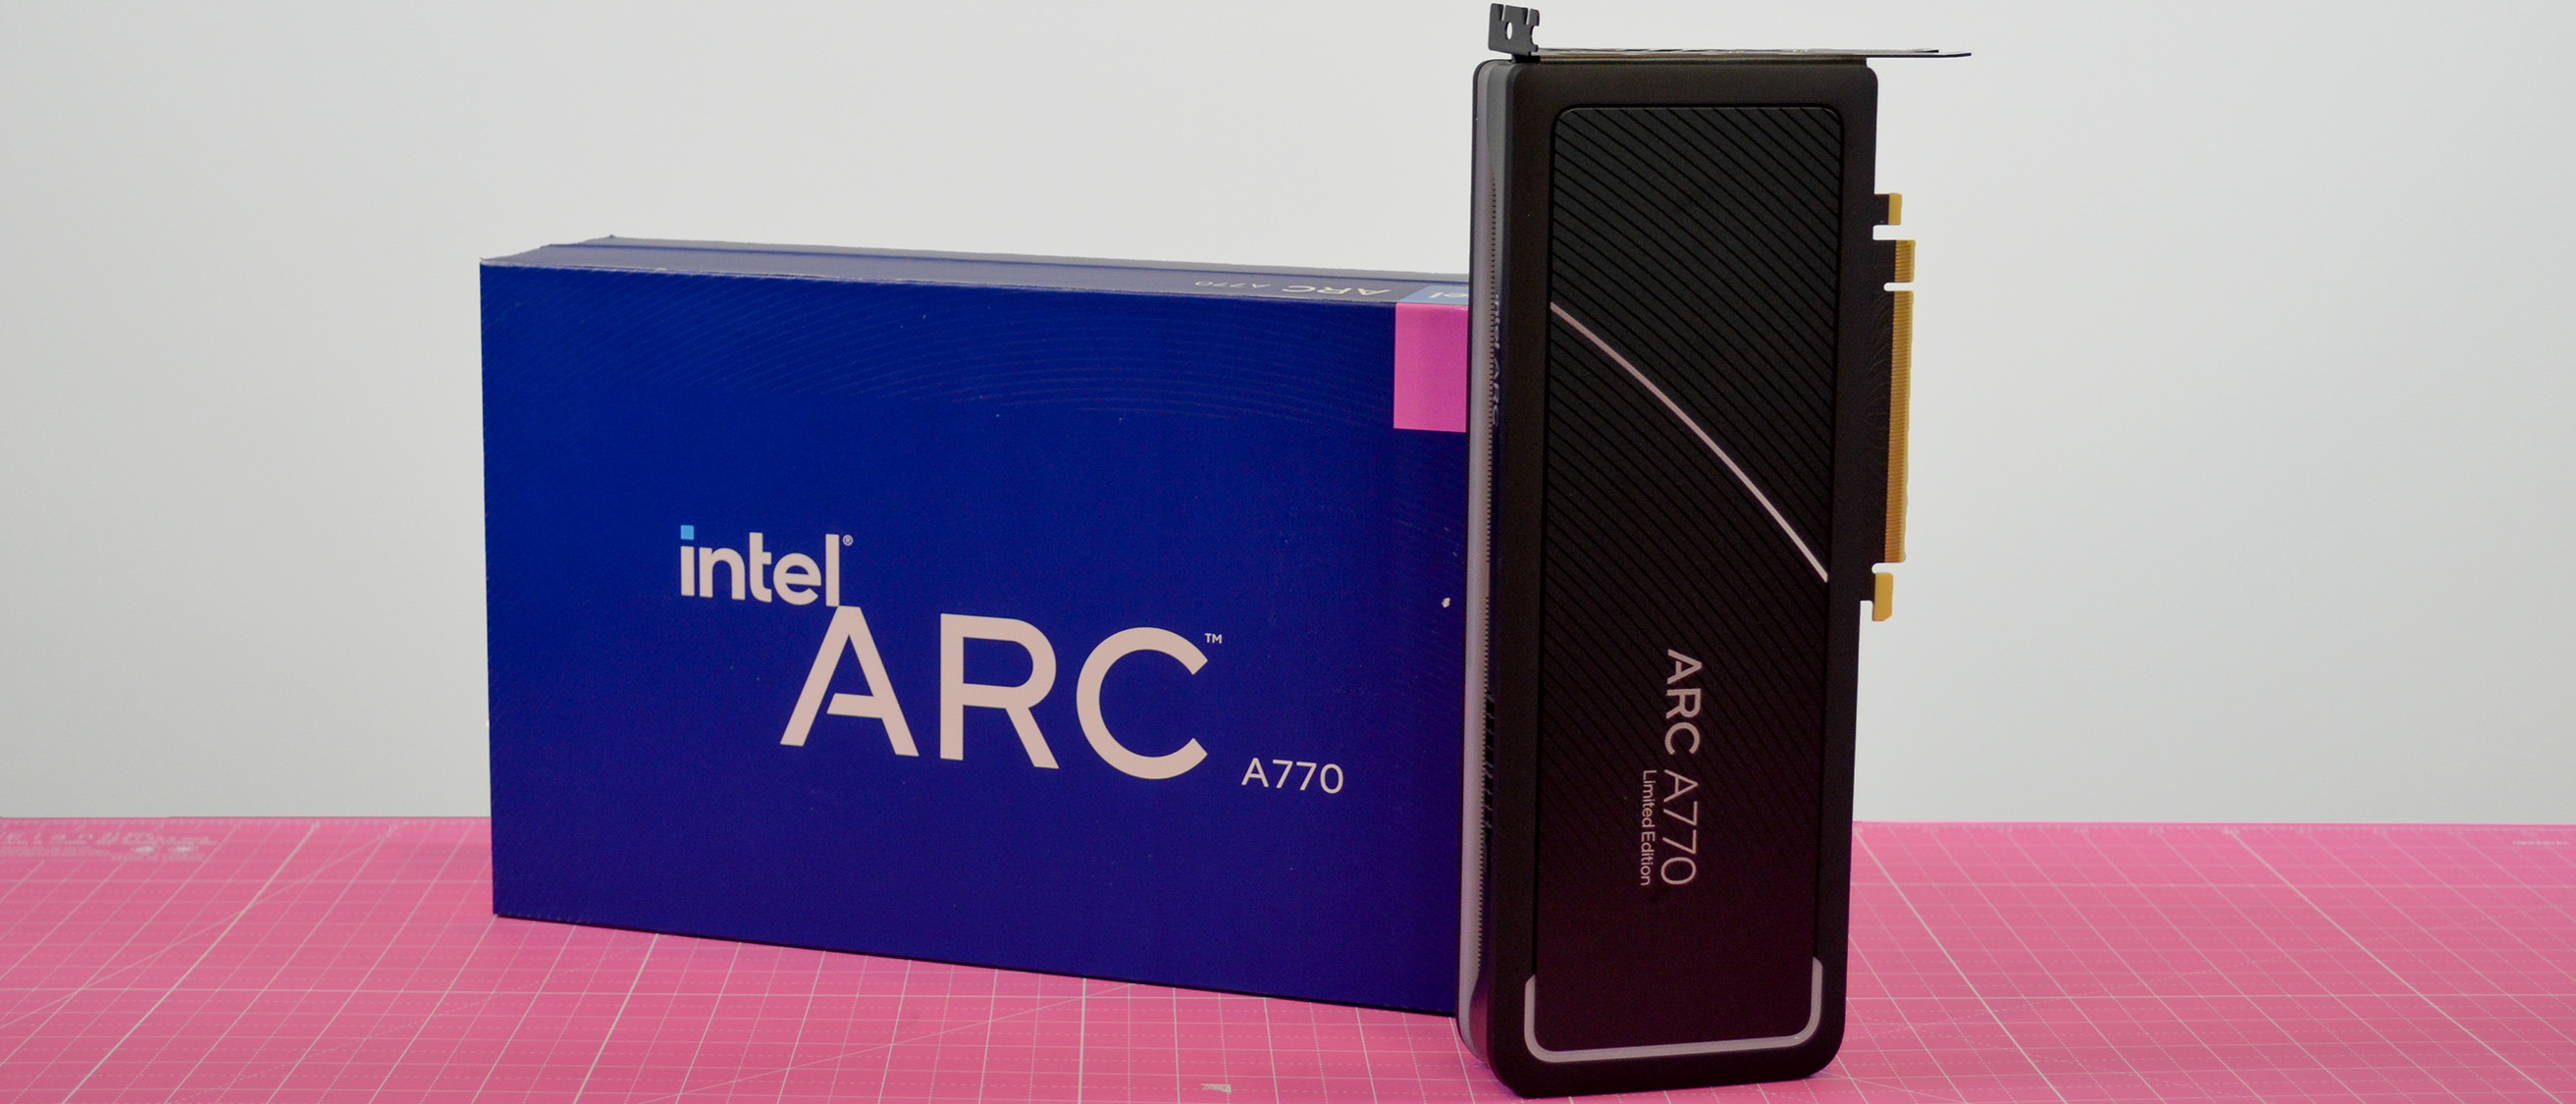 Intel's Arc A770 16GB graphics card reaches $300 in the US, as